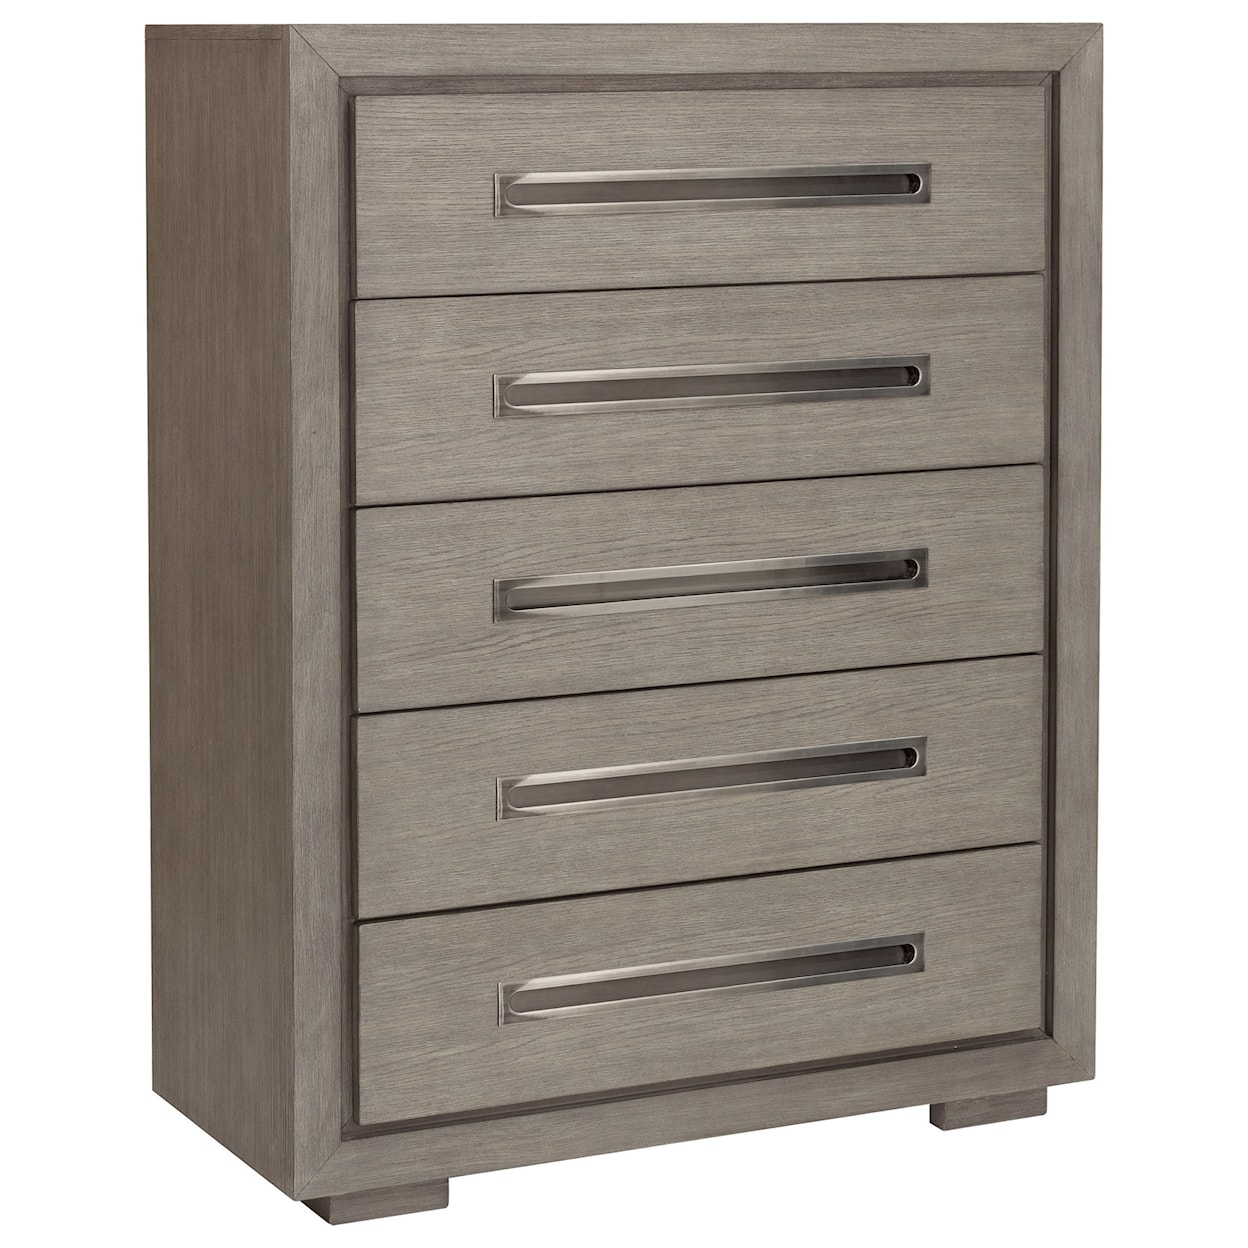 Accentrics Home TruModern Chest of Drawers